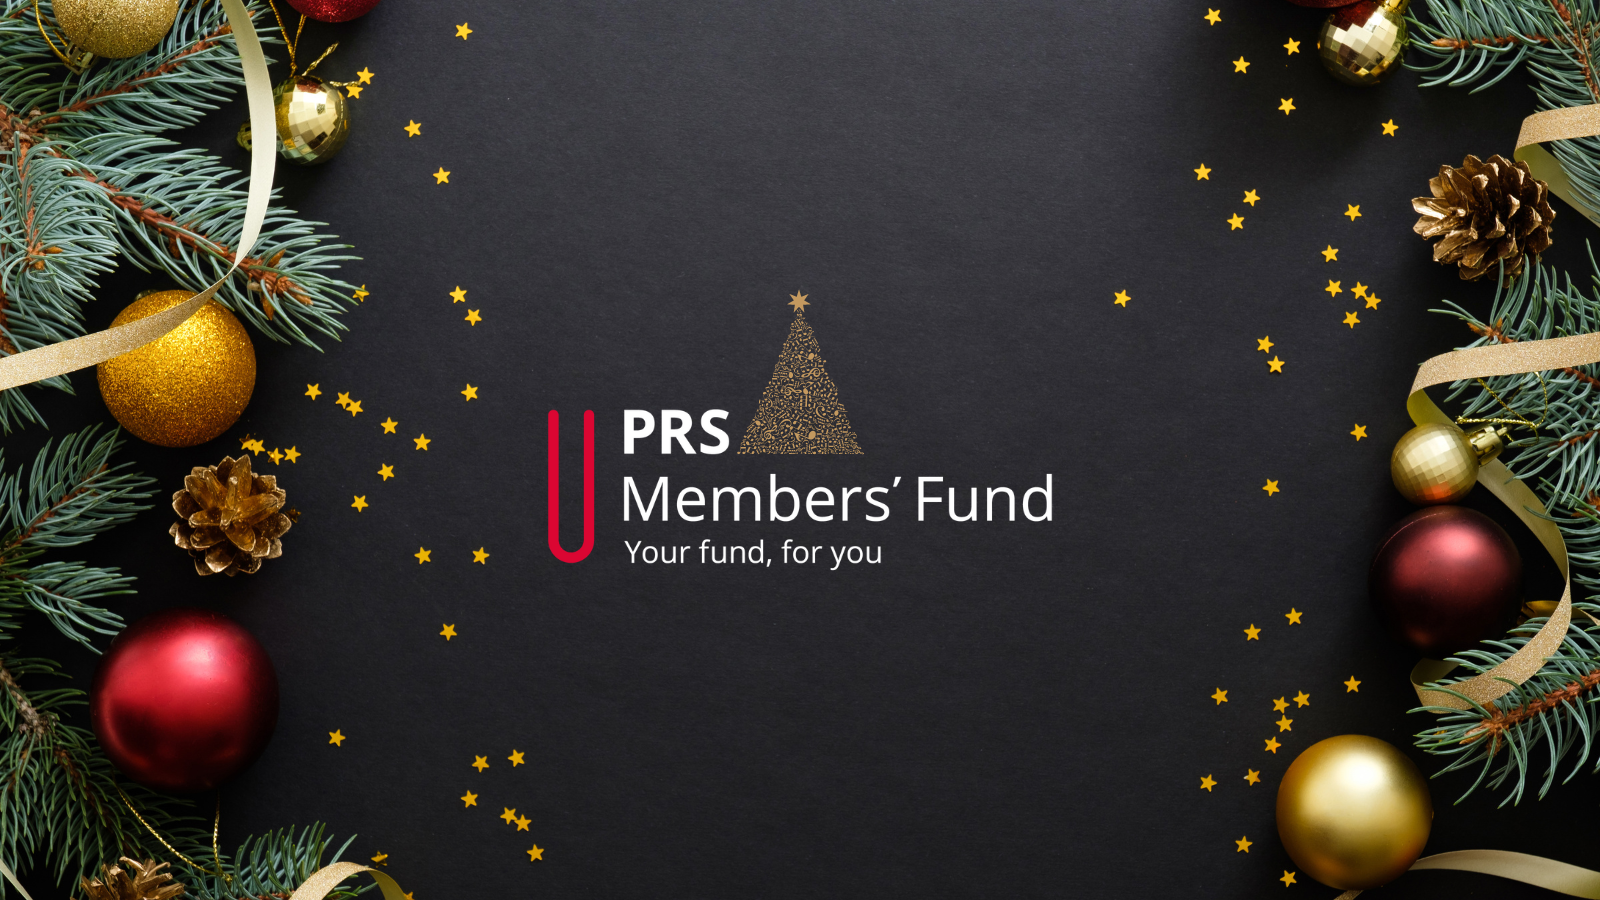 PRS members fund logo on a decorative Christmas theme background